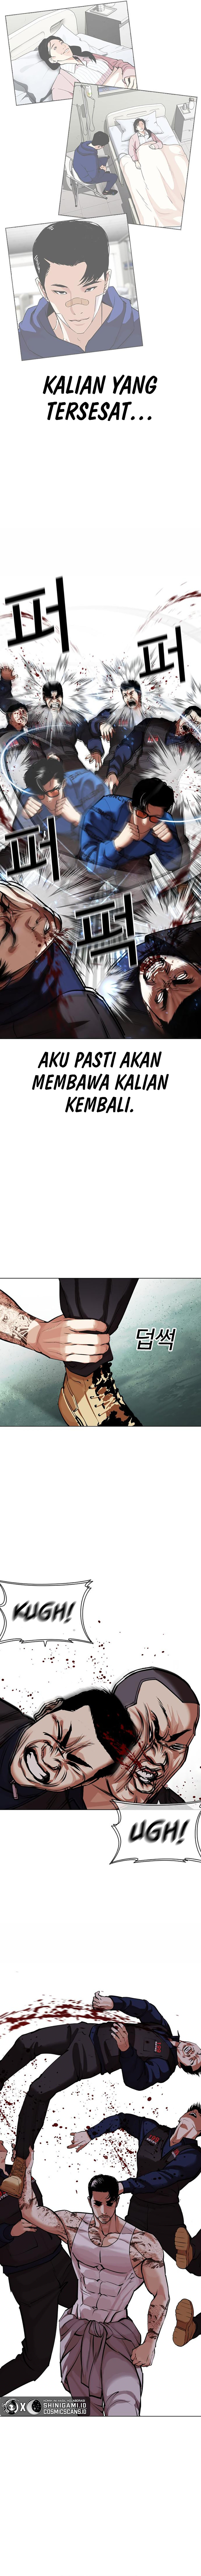 Lookism Chapter 451 Image 12